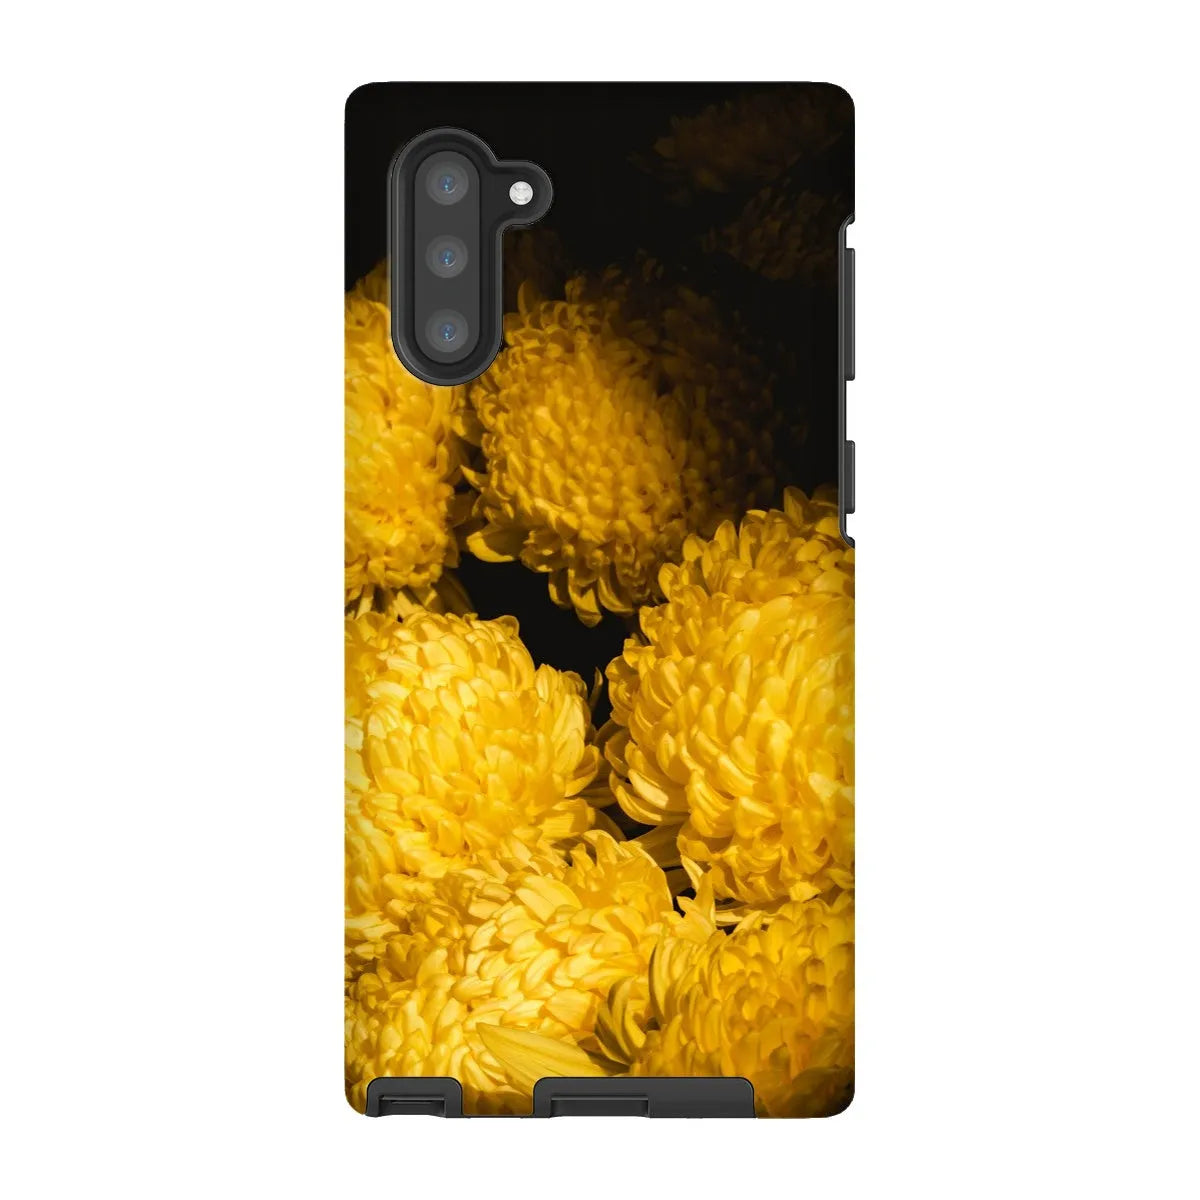 Field Of Dreams Tough Phone Case - Samsung Galaxy Note 10 / Matte - Mobile Phone Cases - Aesthetic Art